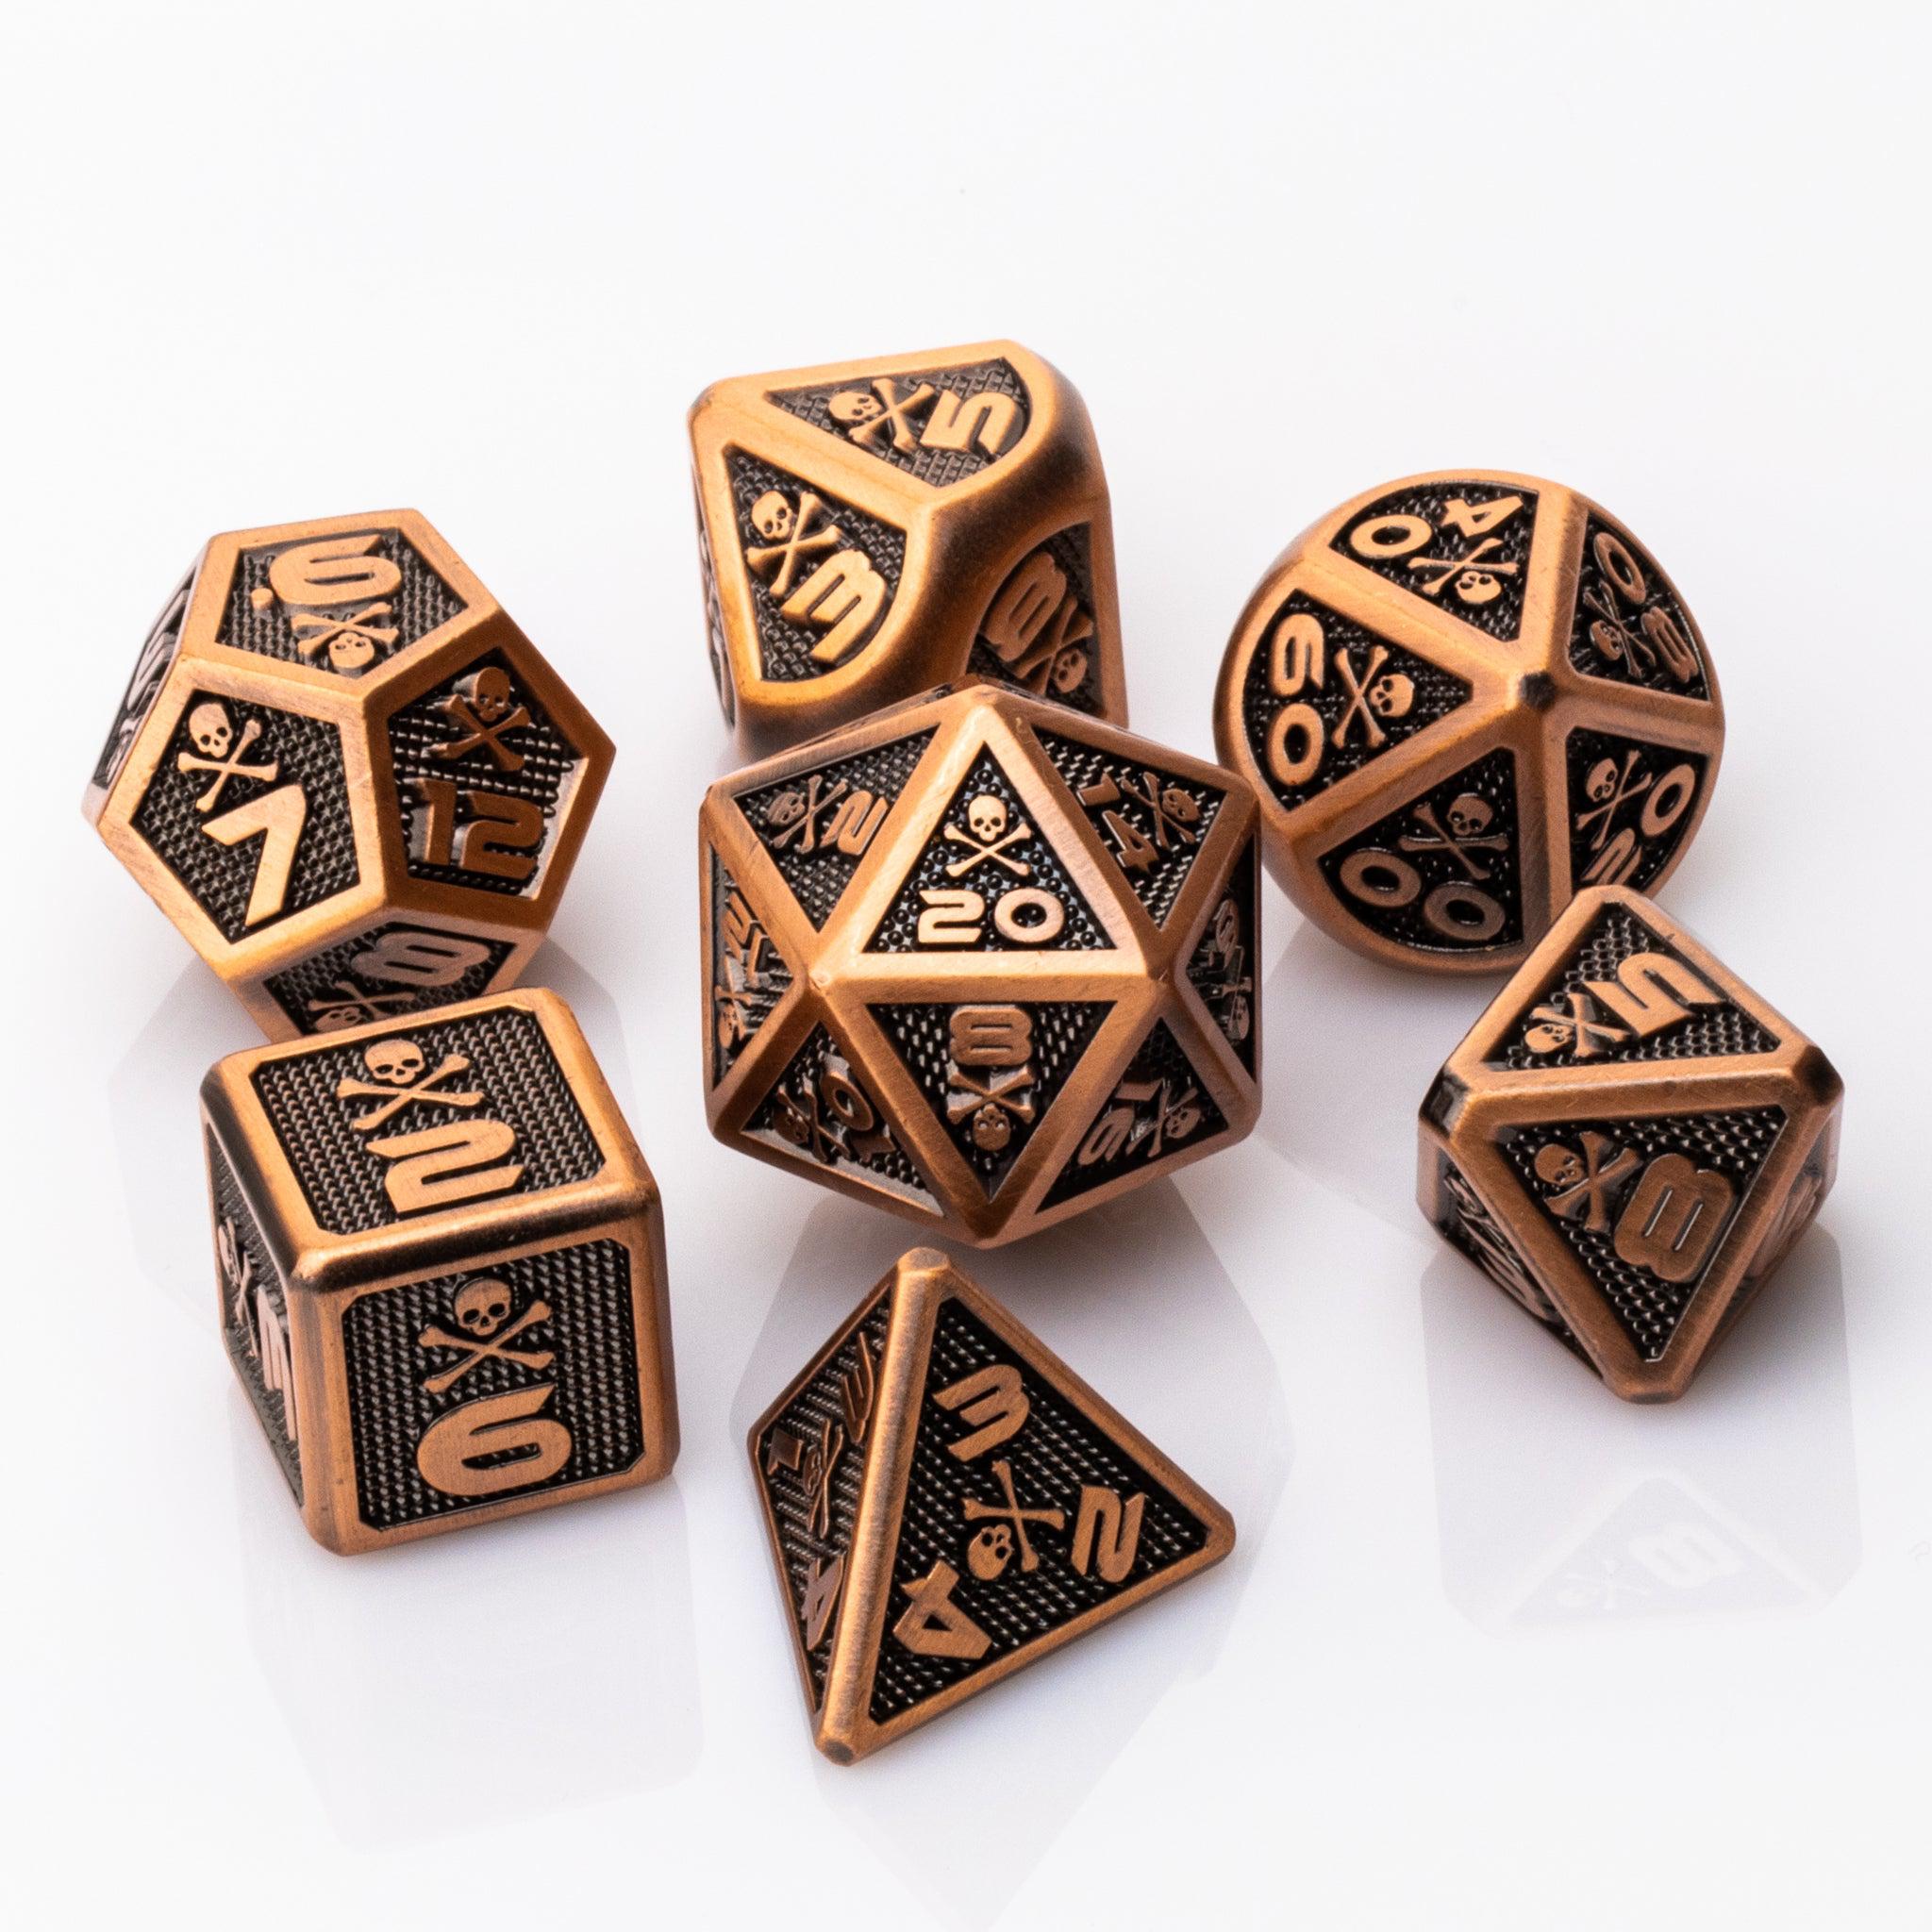 Skullsmash, Copper colored metal RPG dice set with skull and crossbones on a white background.